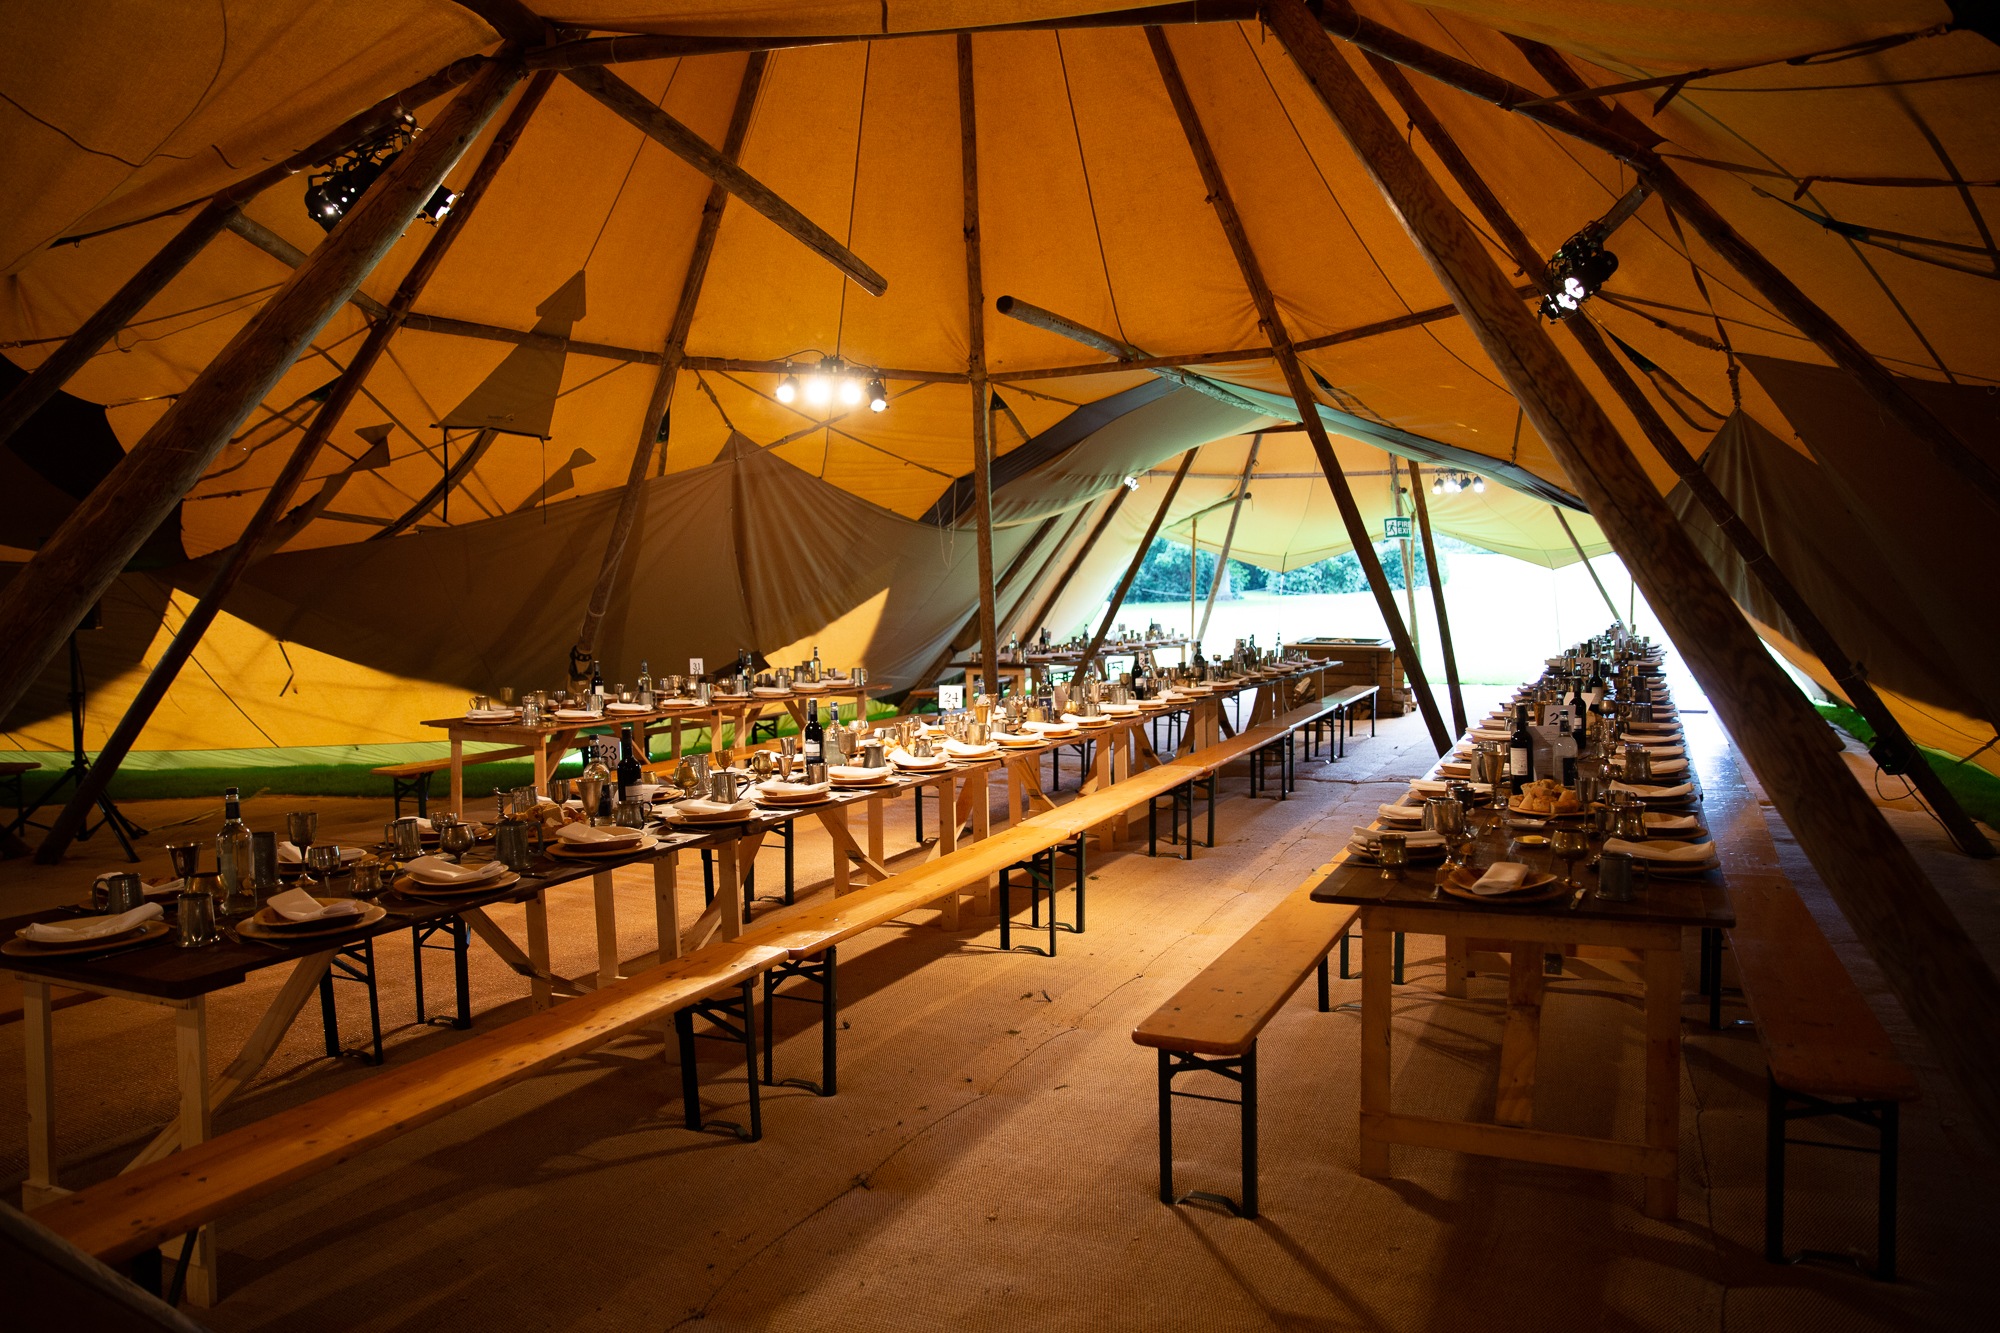 Tipi Themed Dining Veiled Productions